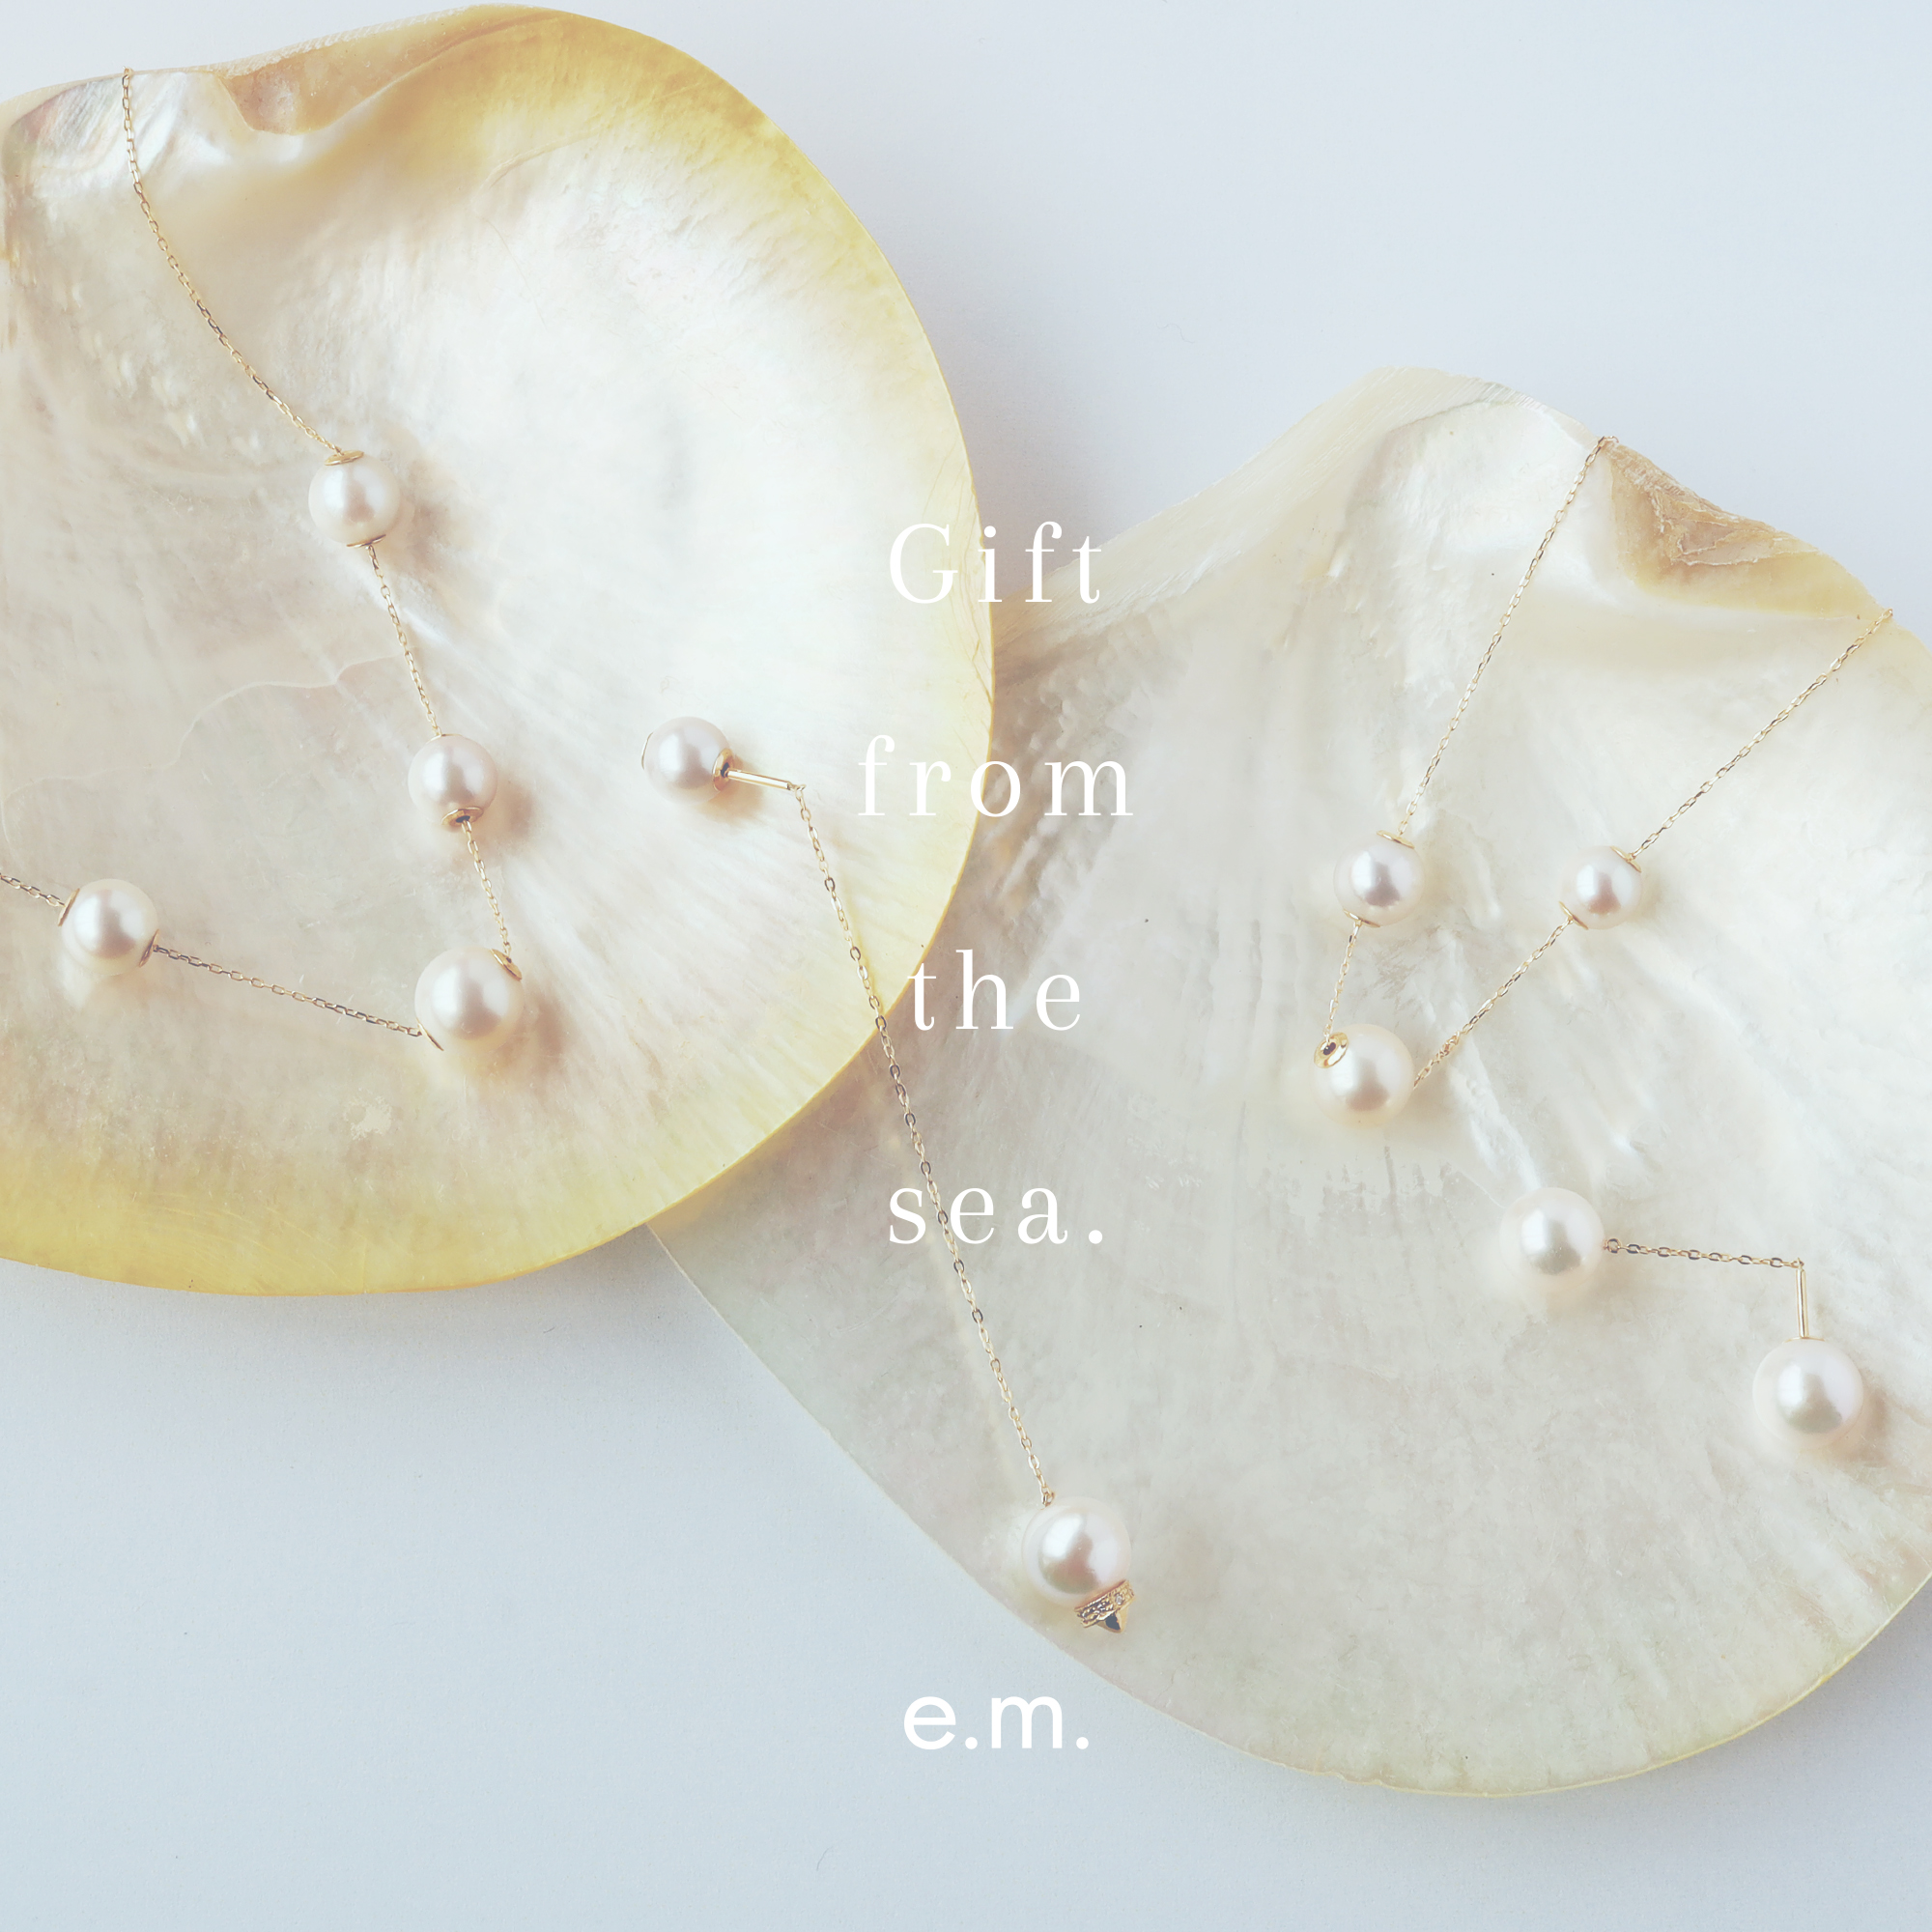 e.m._Gift from the sea._pearl